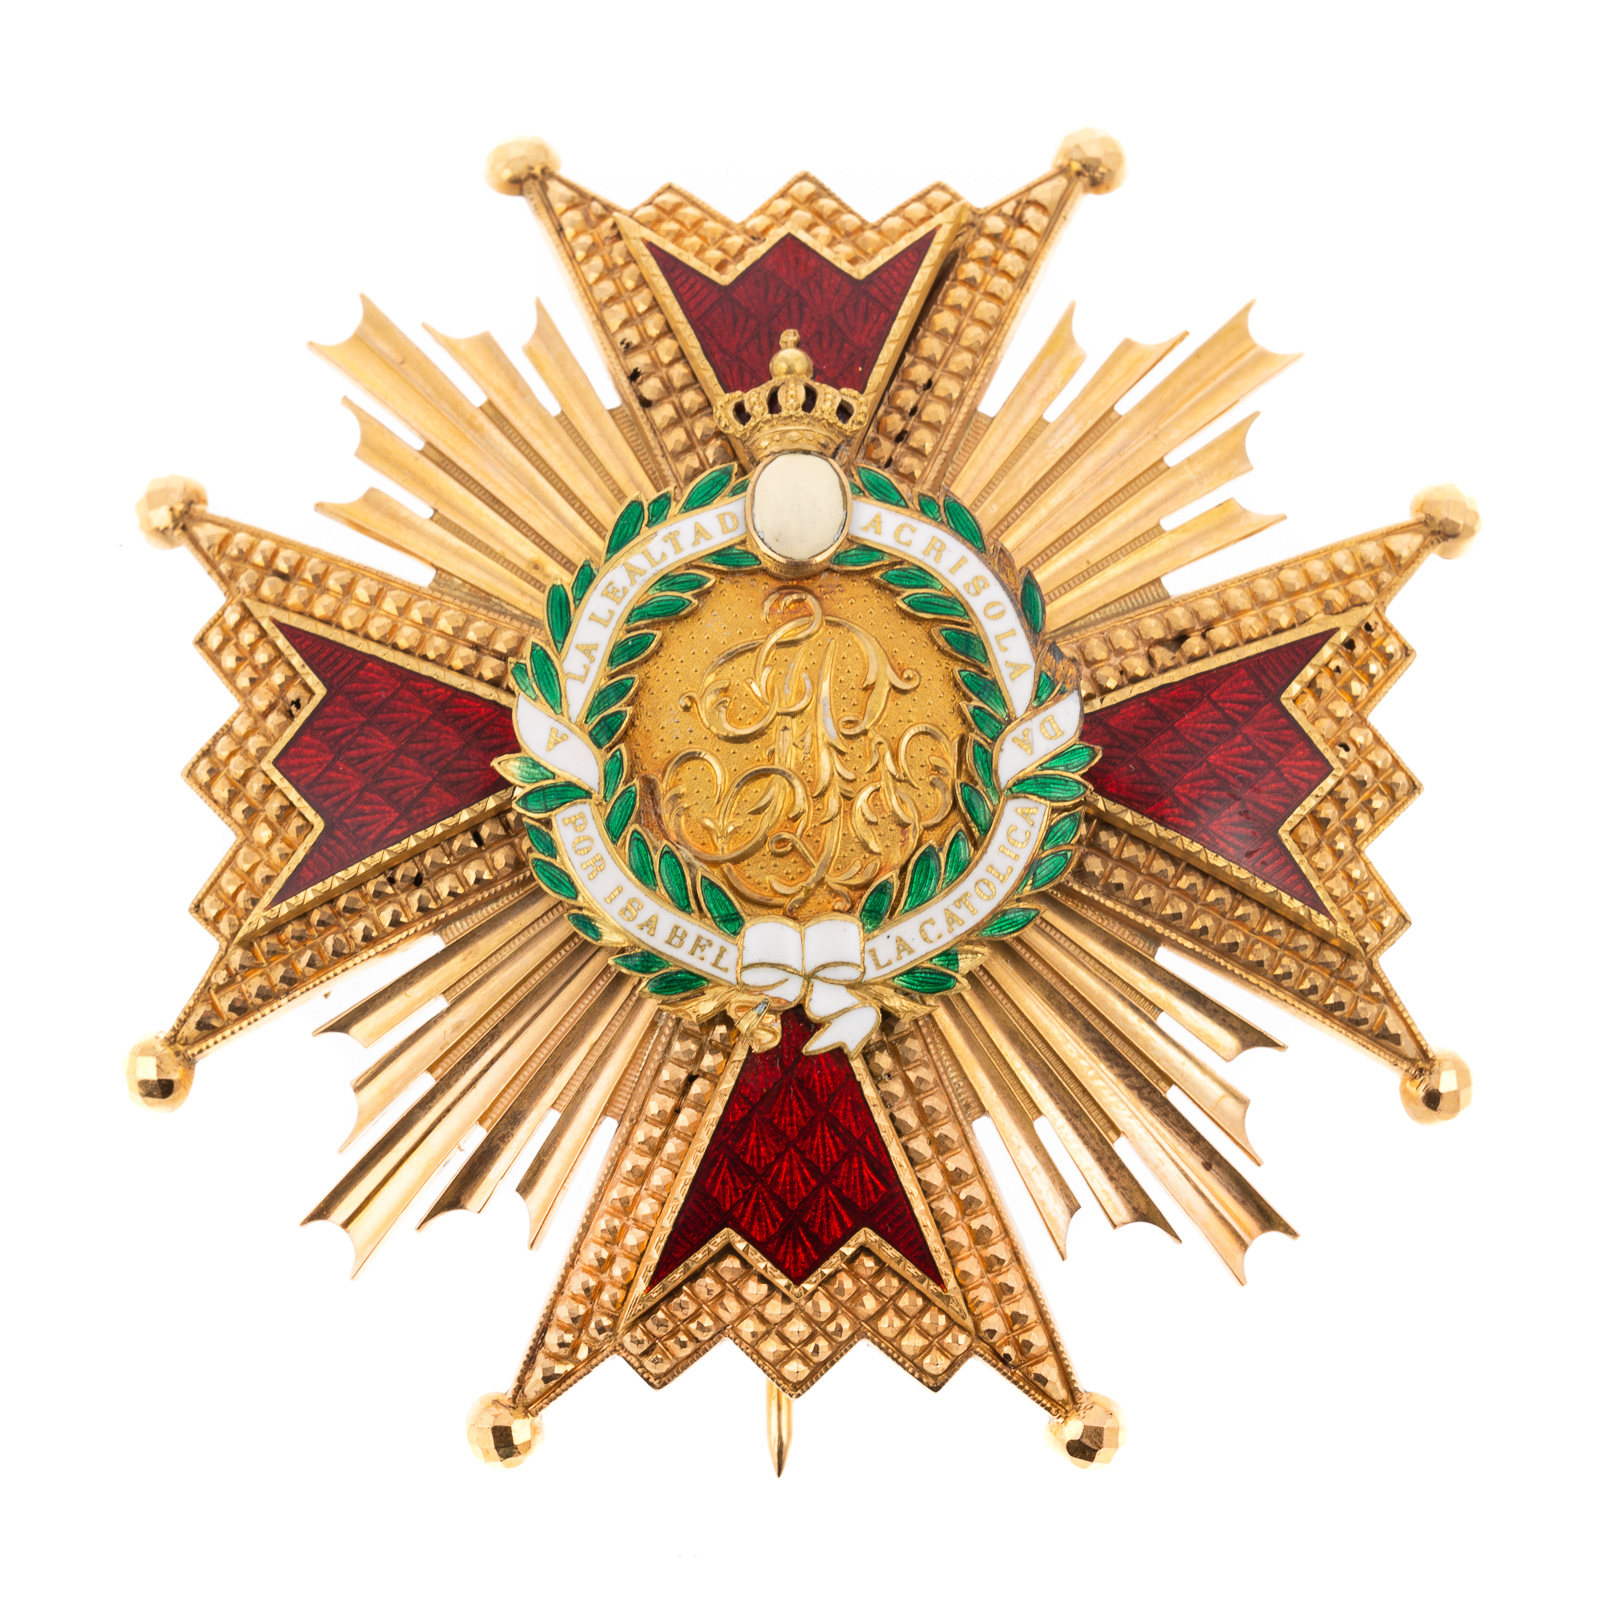 A ROYAL ORDER OF ISABEL THE CATHOLIC 287be0